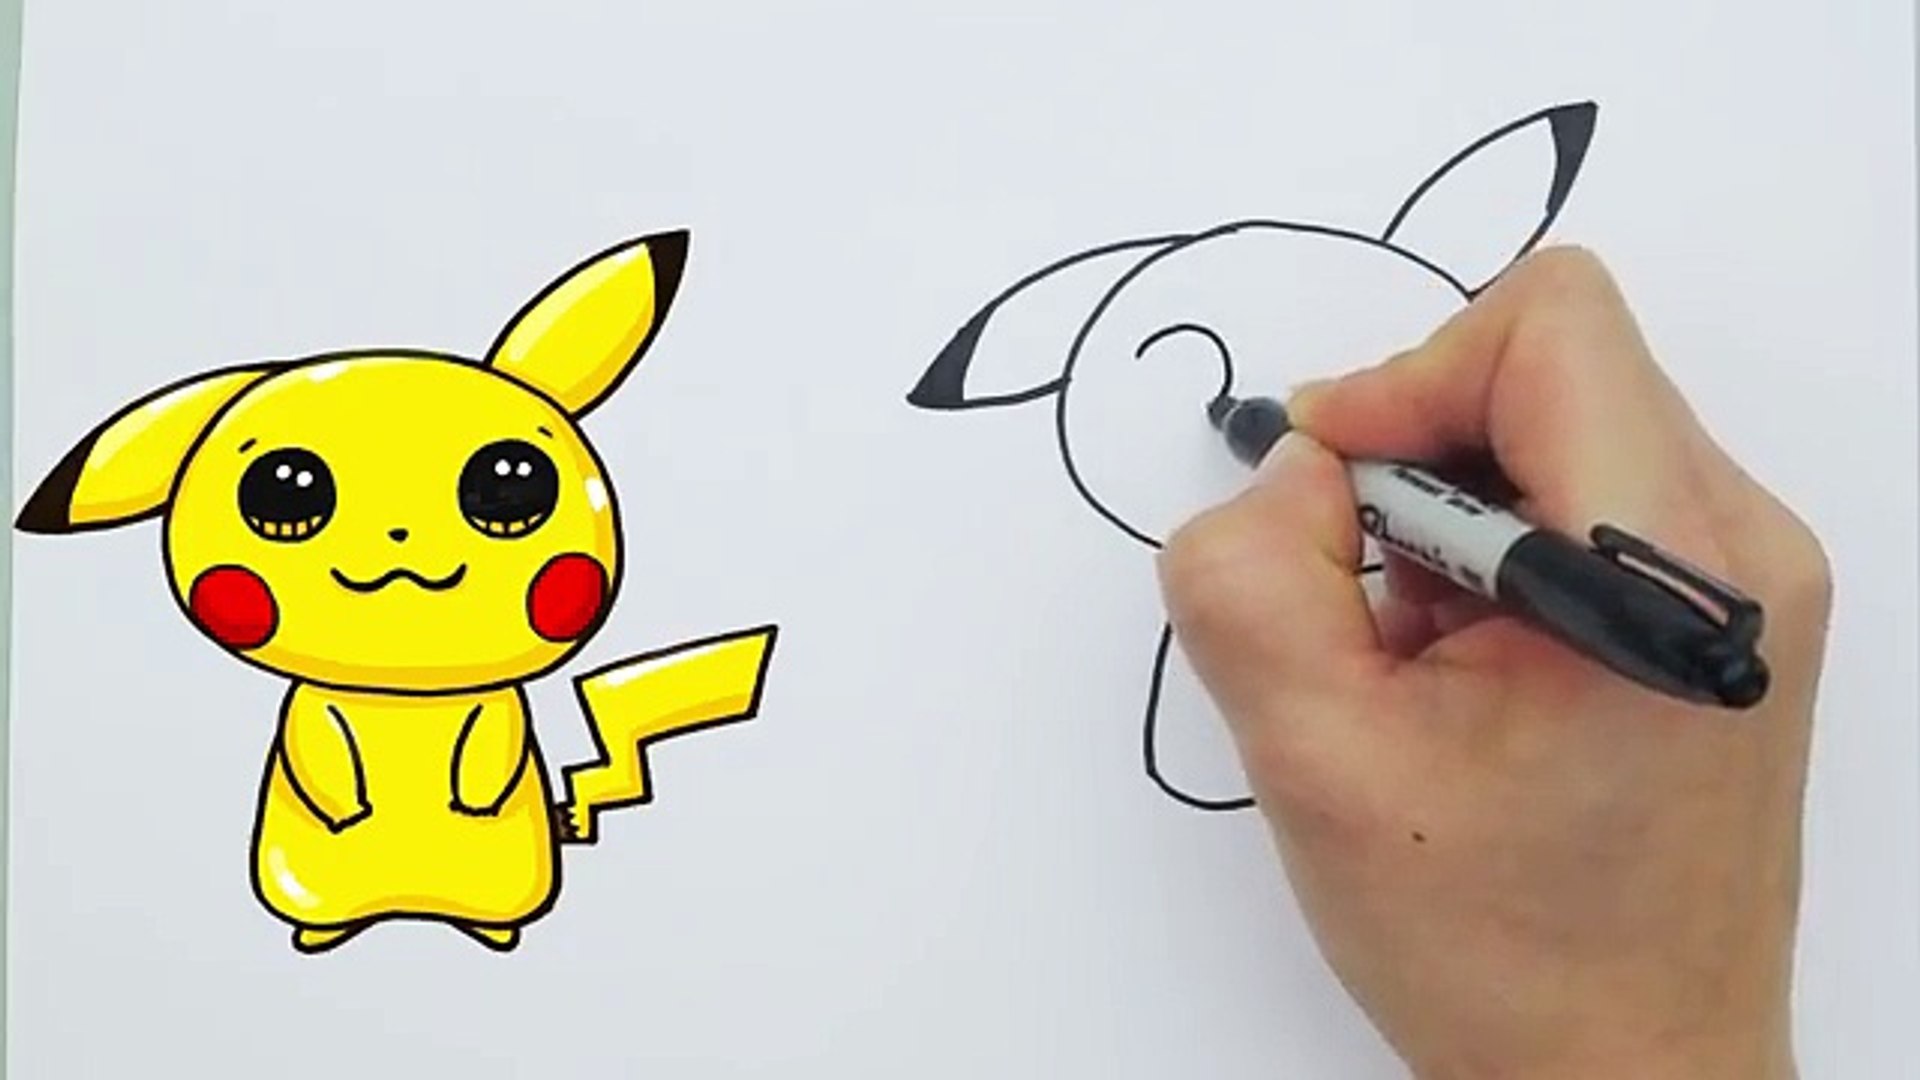 how to draw cute pikachu